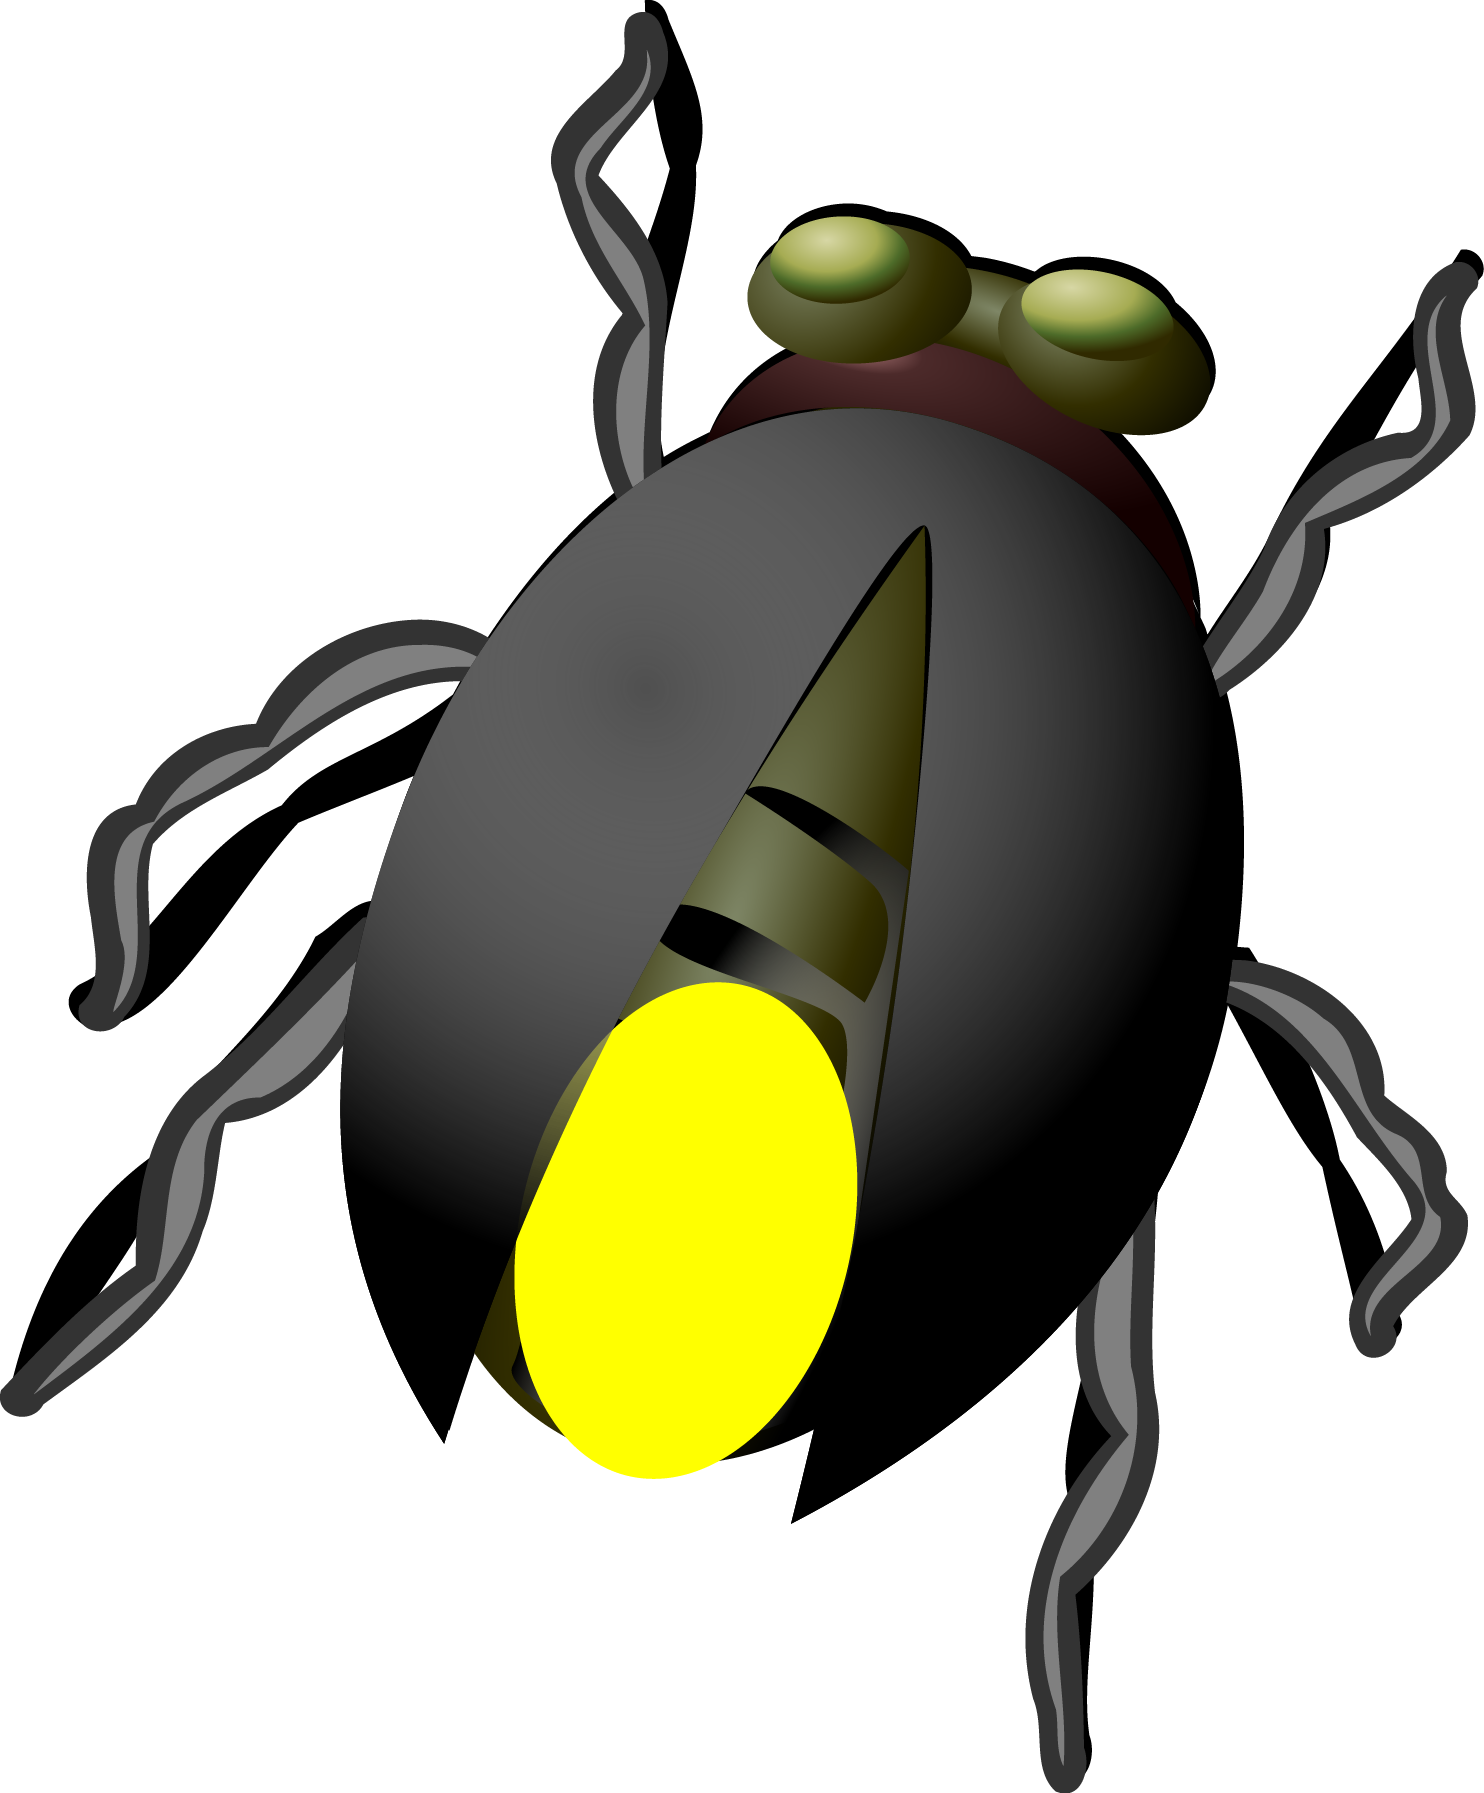 A Cartoon Of A Bug With A Yellow Light